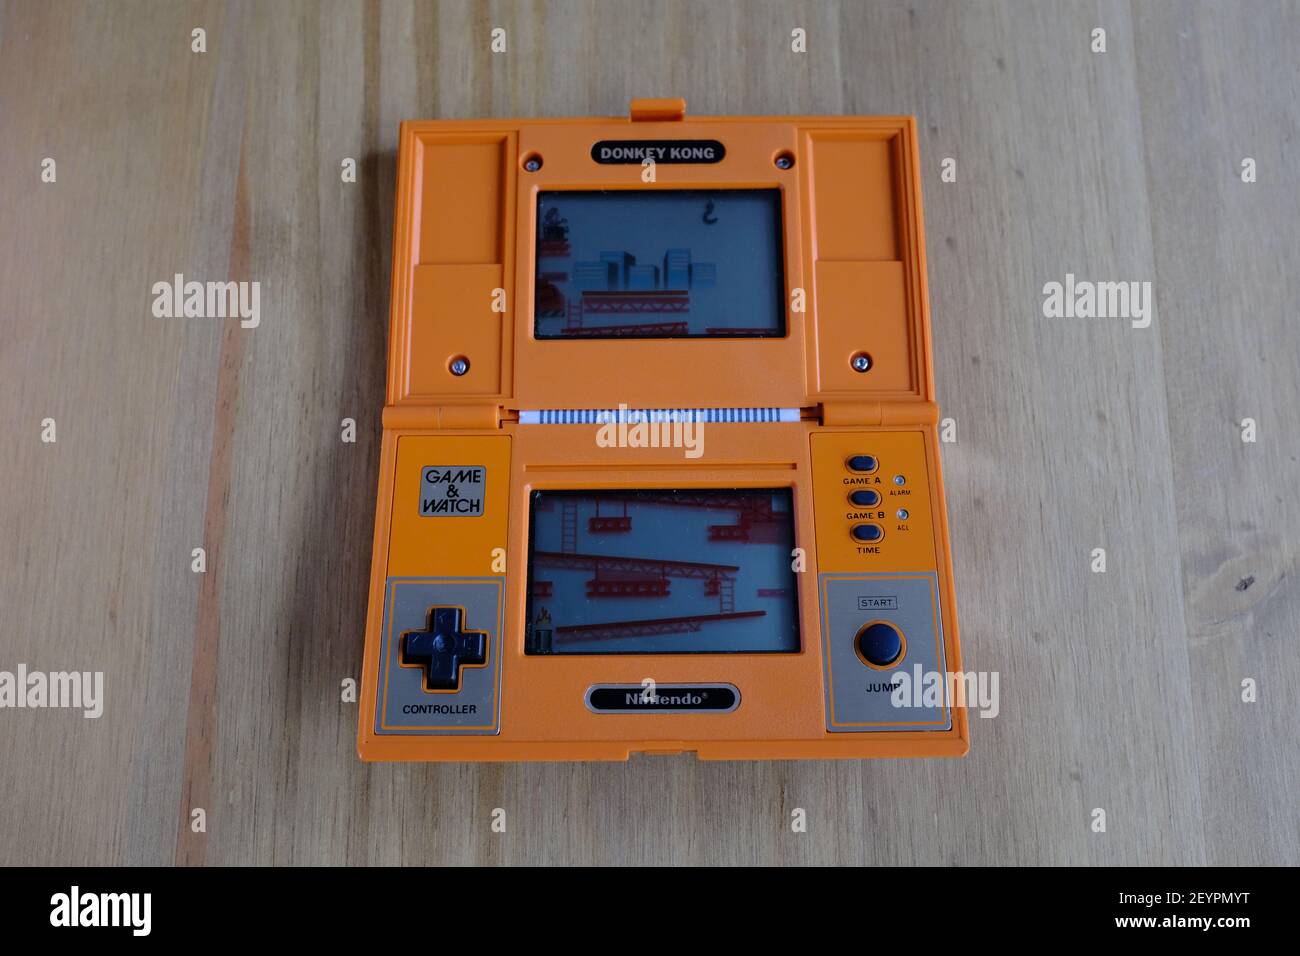 LONDON - 6TH MARCH 2021: The original 1982 Nintendo Game and Watch Donkey  Kong handheld games console Stock Photo - Alamy